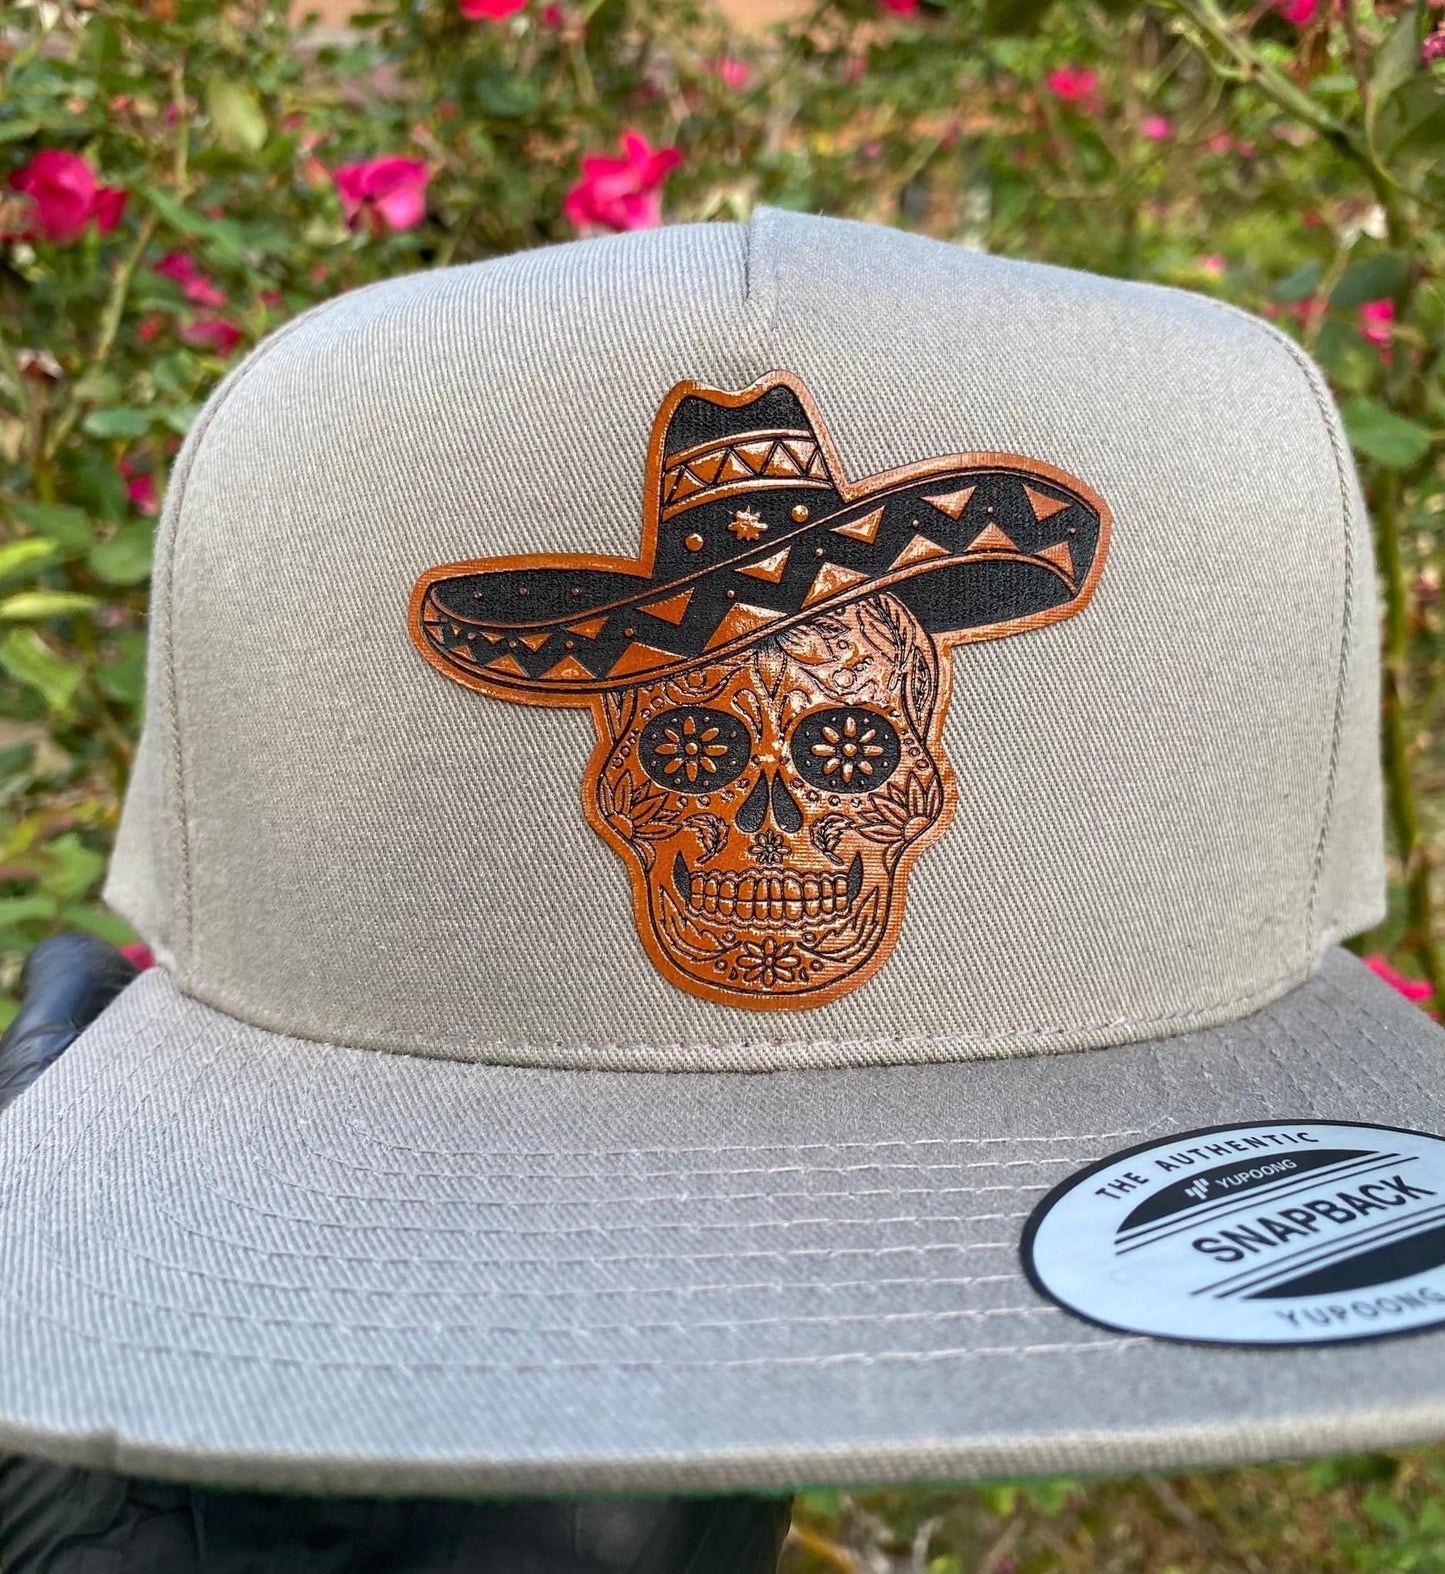 Custom Snap Backs with Leather Patch